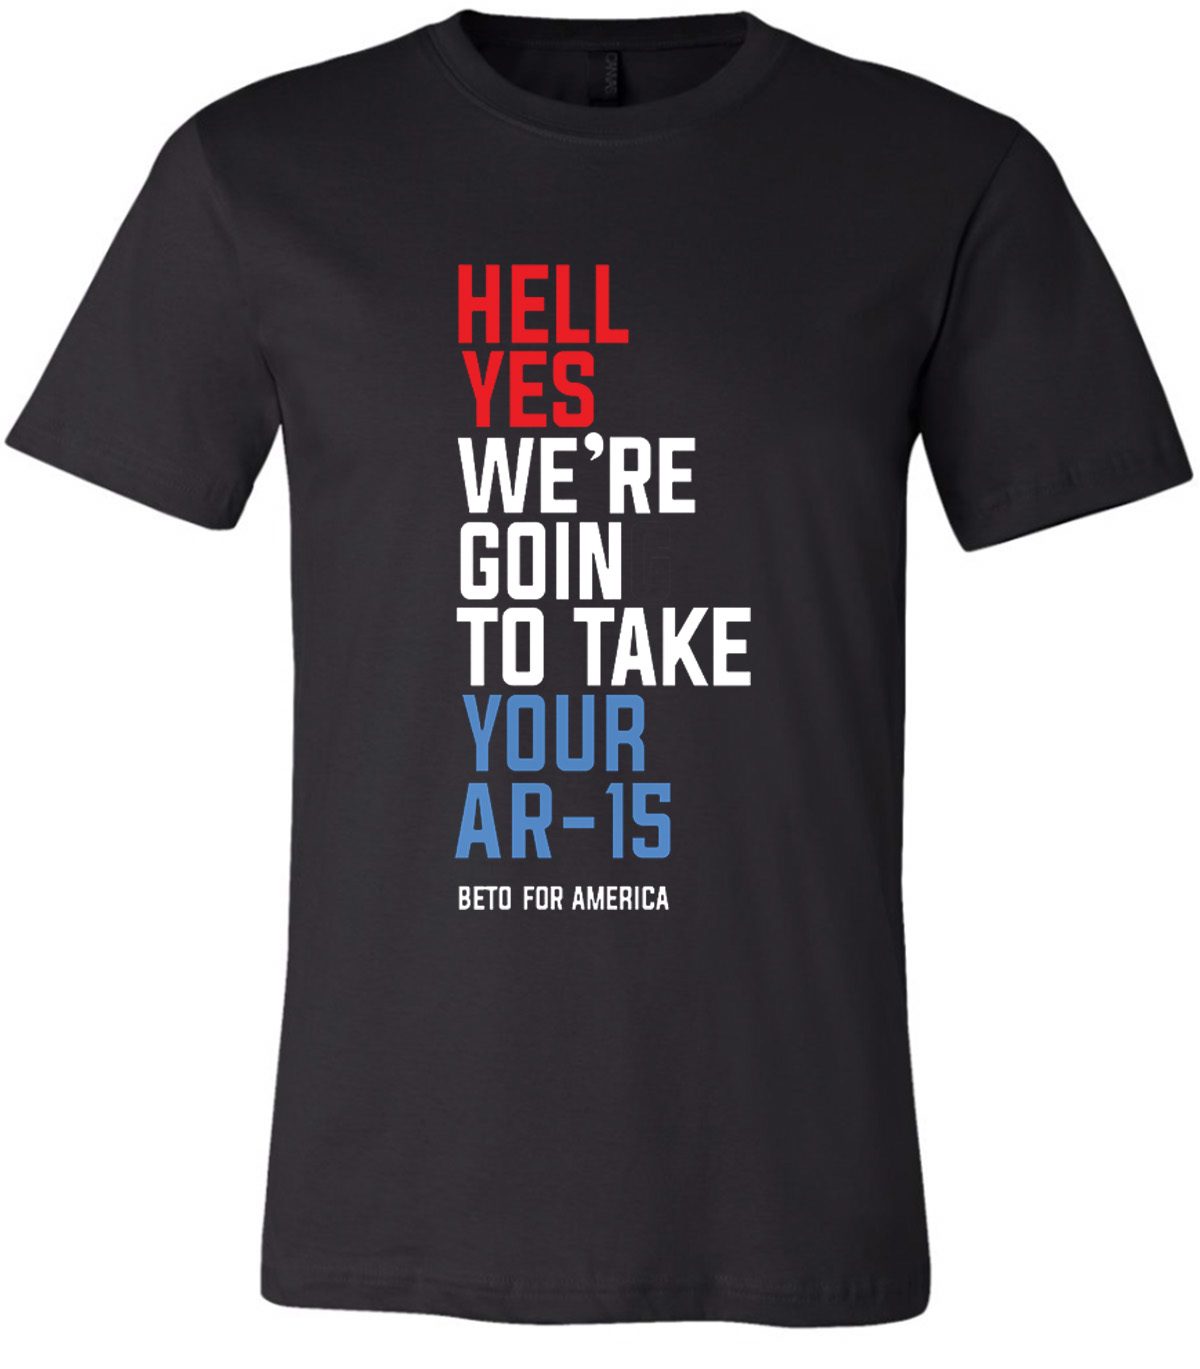 Buy Beto Hell Yes We’re Going To Take Your Ar-15 T-Shirt - ShirtsMango ...